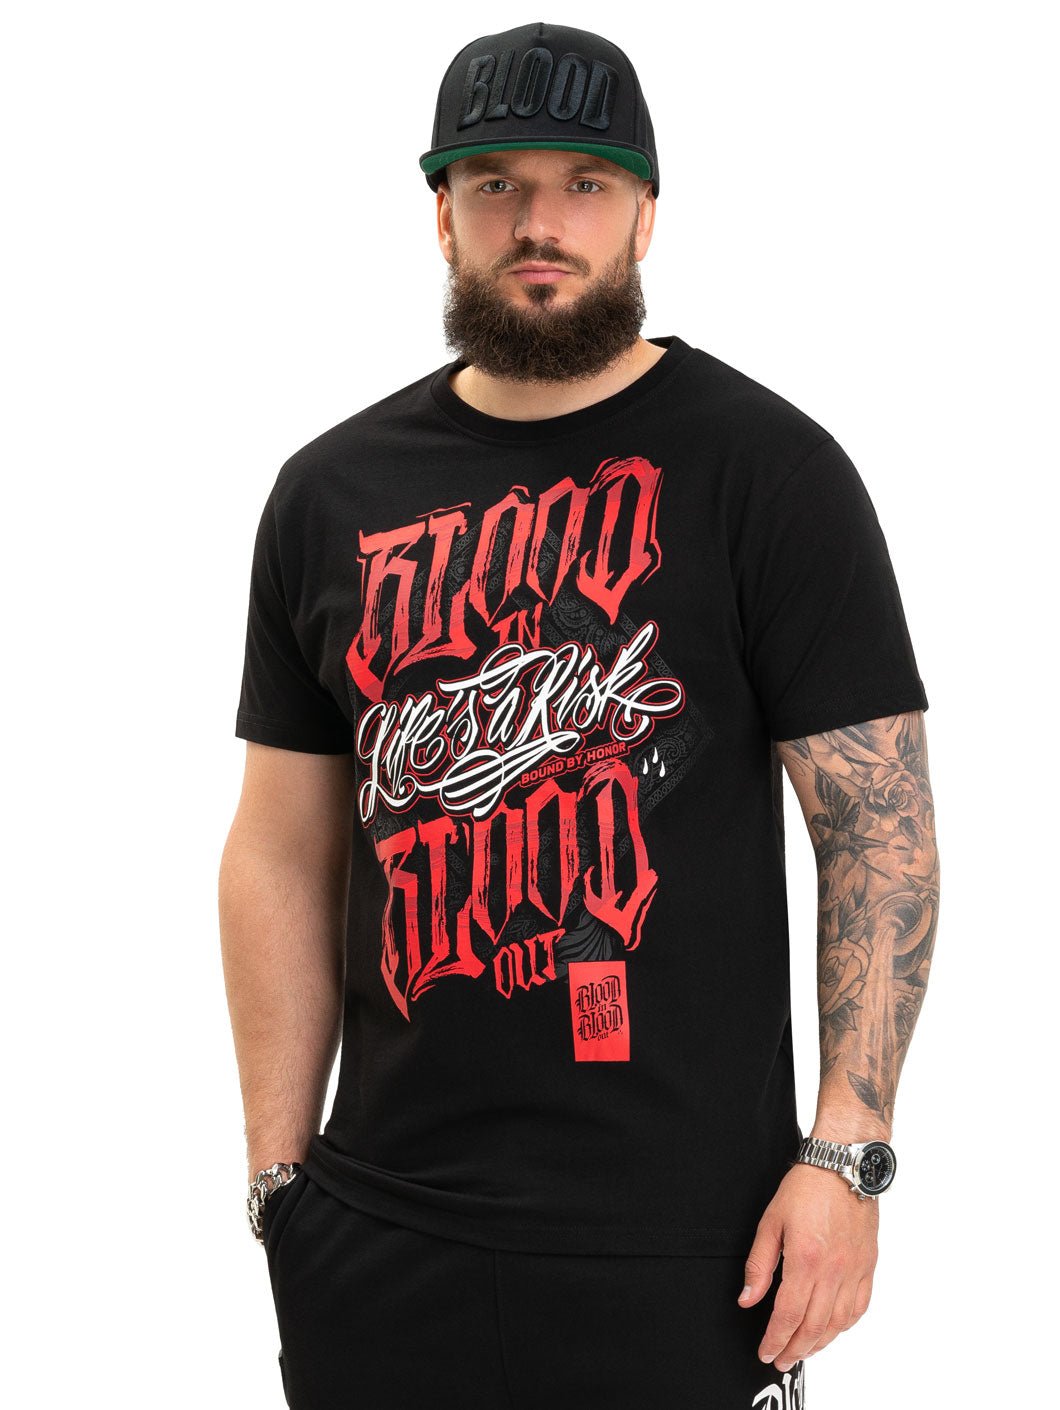 Blood In Blood Out Cadenaro T-Shirt - 7